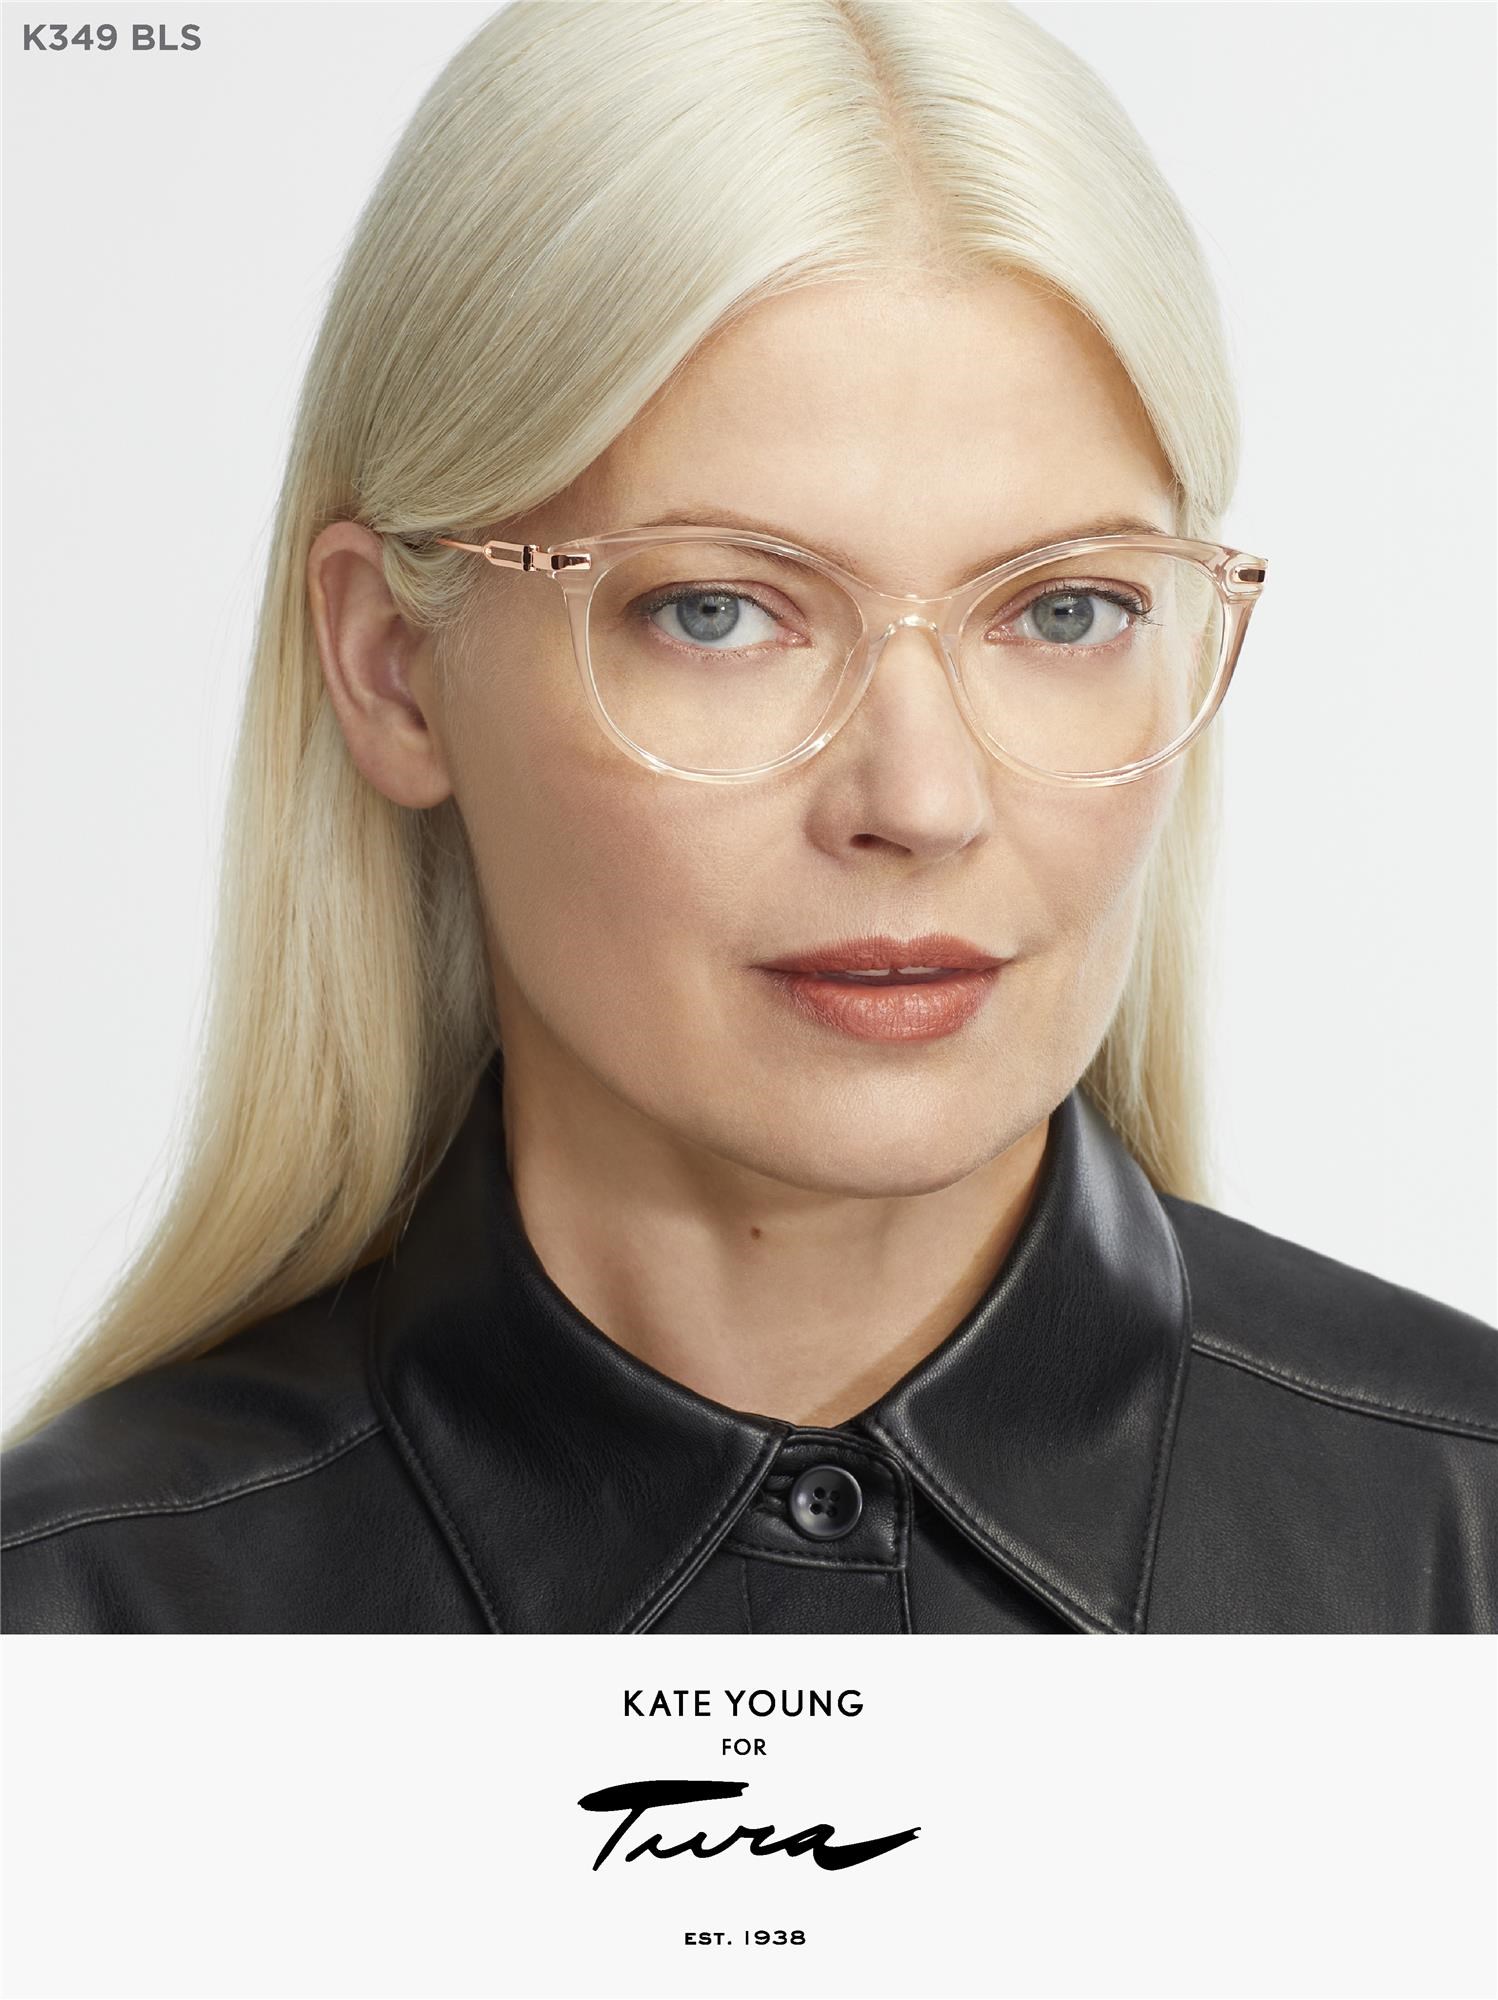 Kate Young for Tura